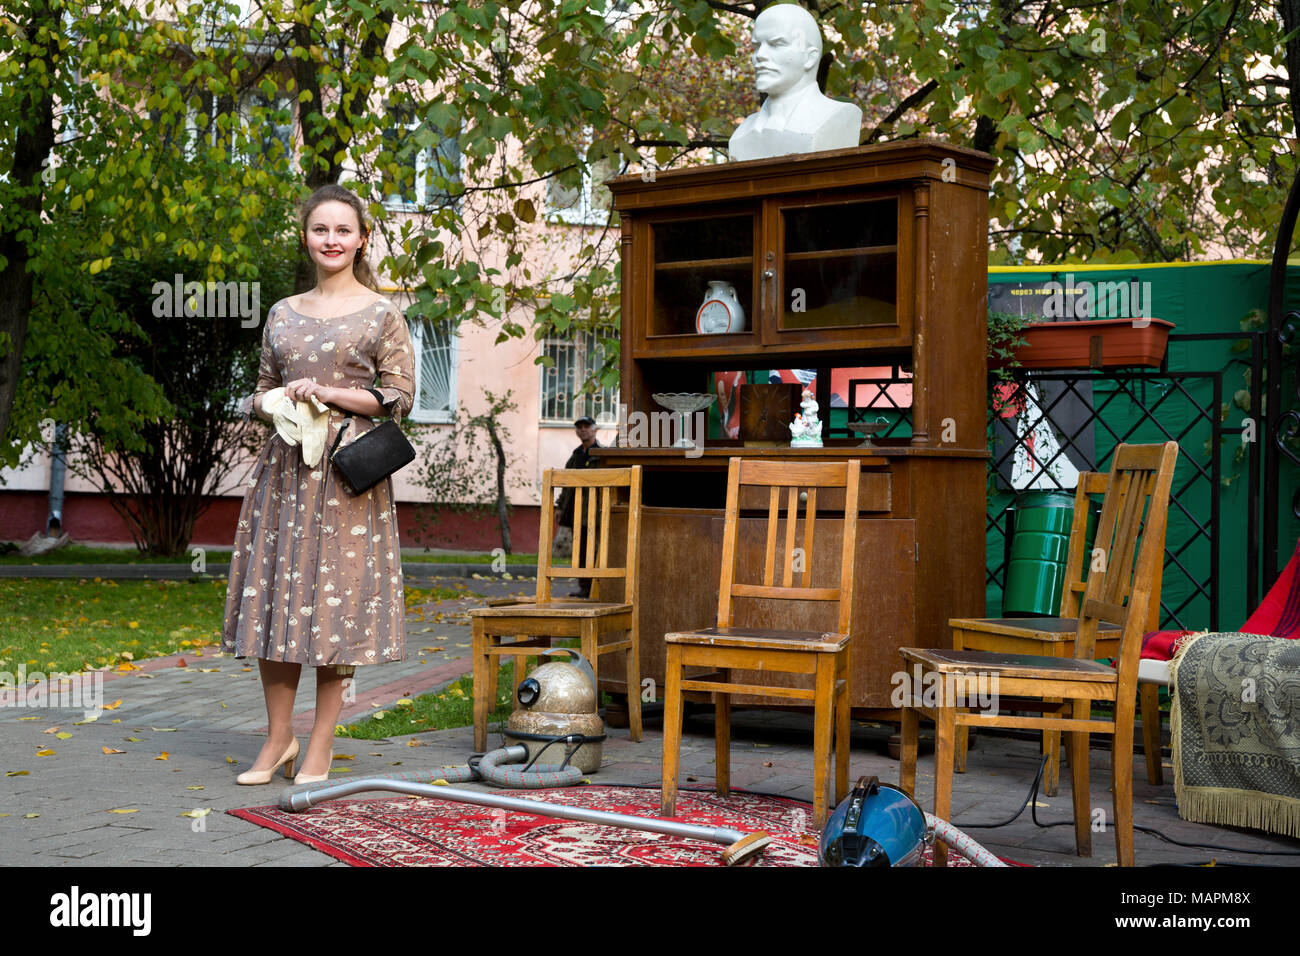 Theatrical reconstruction of the Soviet flat interior in the style of the sixties in Moscow's old courtyard during festival Khrushchevka .NET, Russia Stock Photo